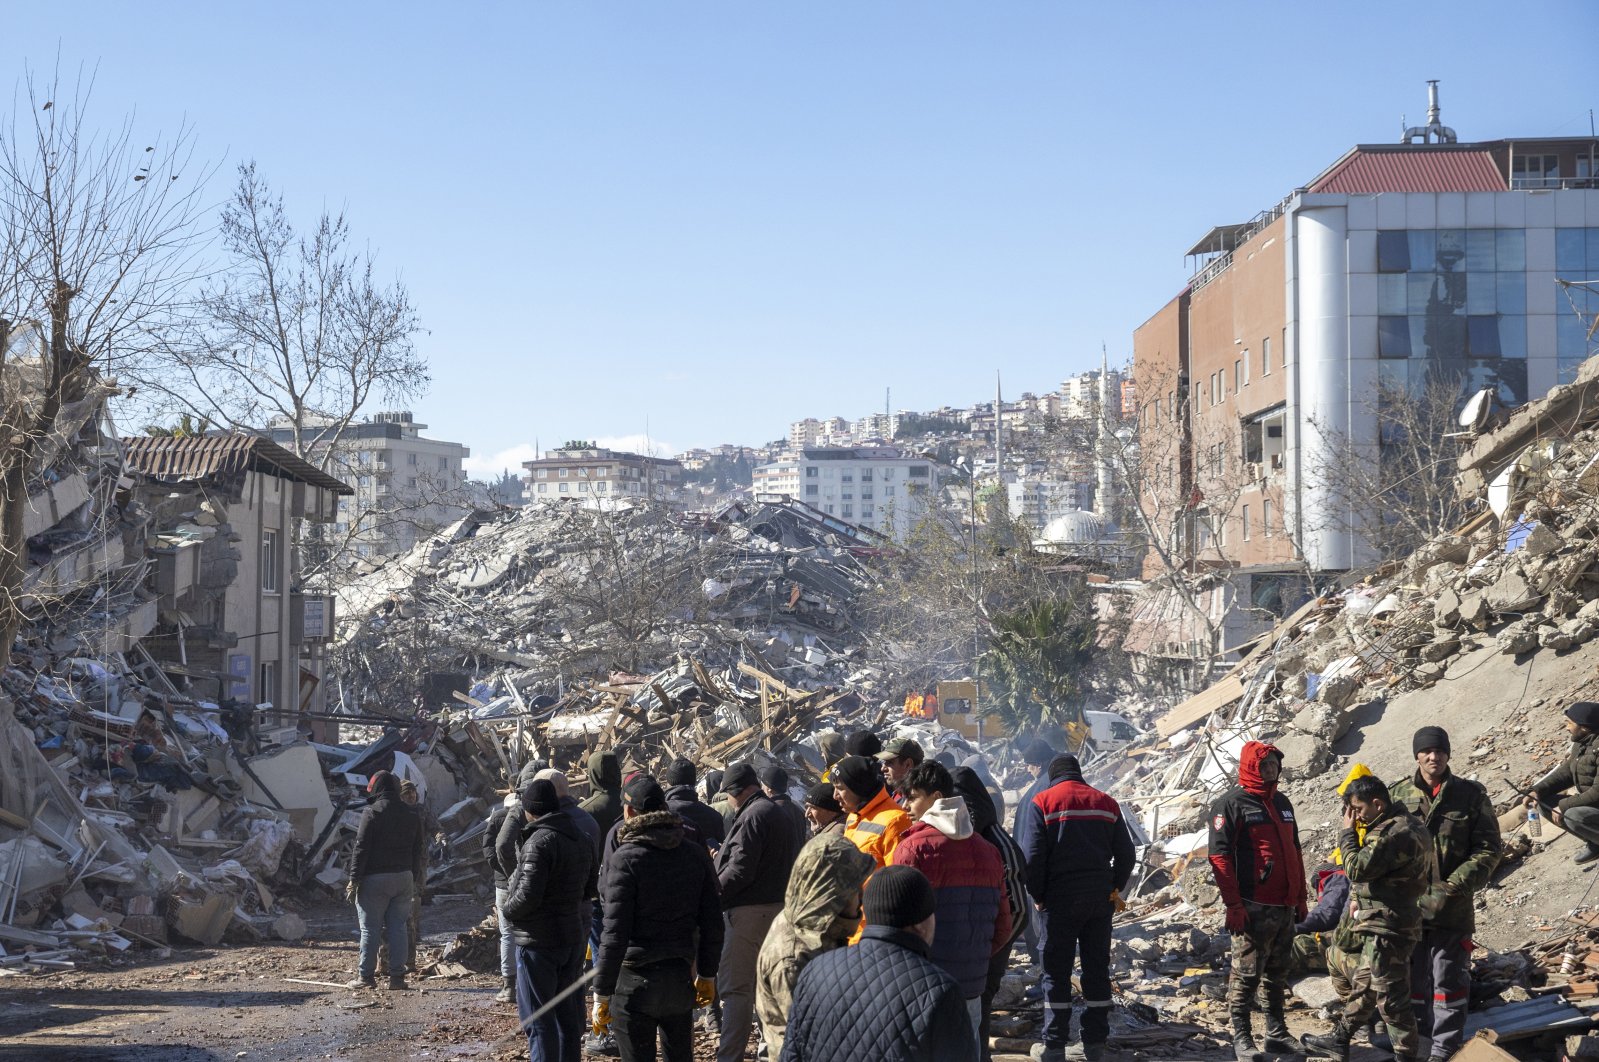 People work at the site of a collapsed building, in the aftermath of the deadly earthquake, Kahramanmaraş, Türkiye, Feb. 8, 2023. (AA Photo)